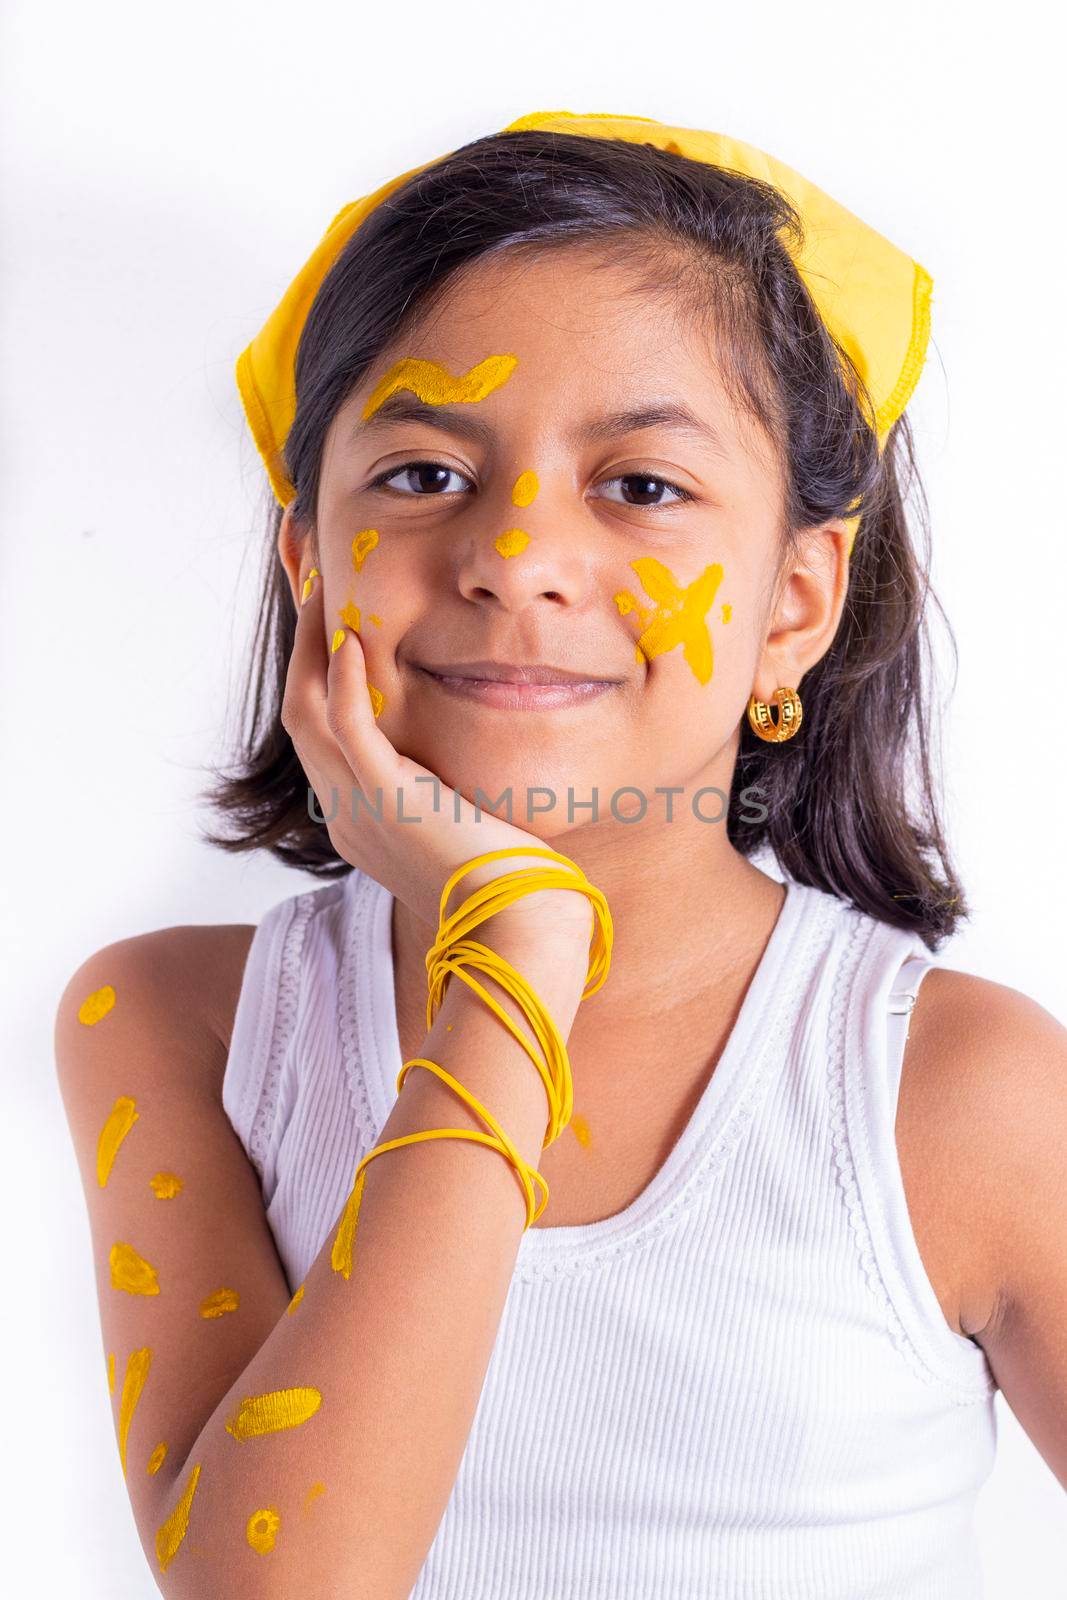 Happy little girl, with her face painted to celebrate the yellow day by eagg13